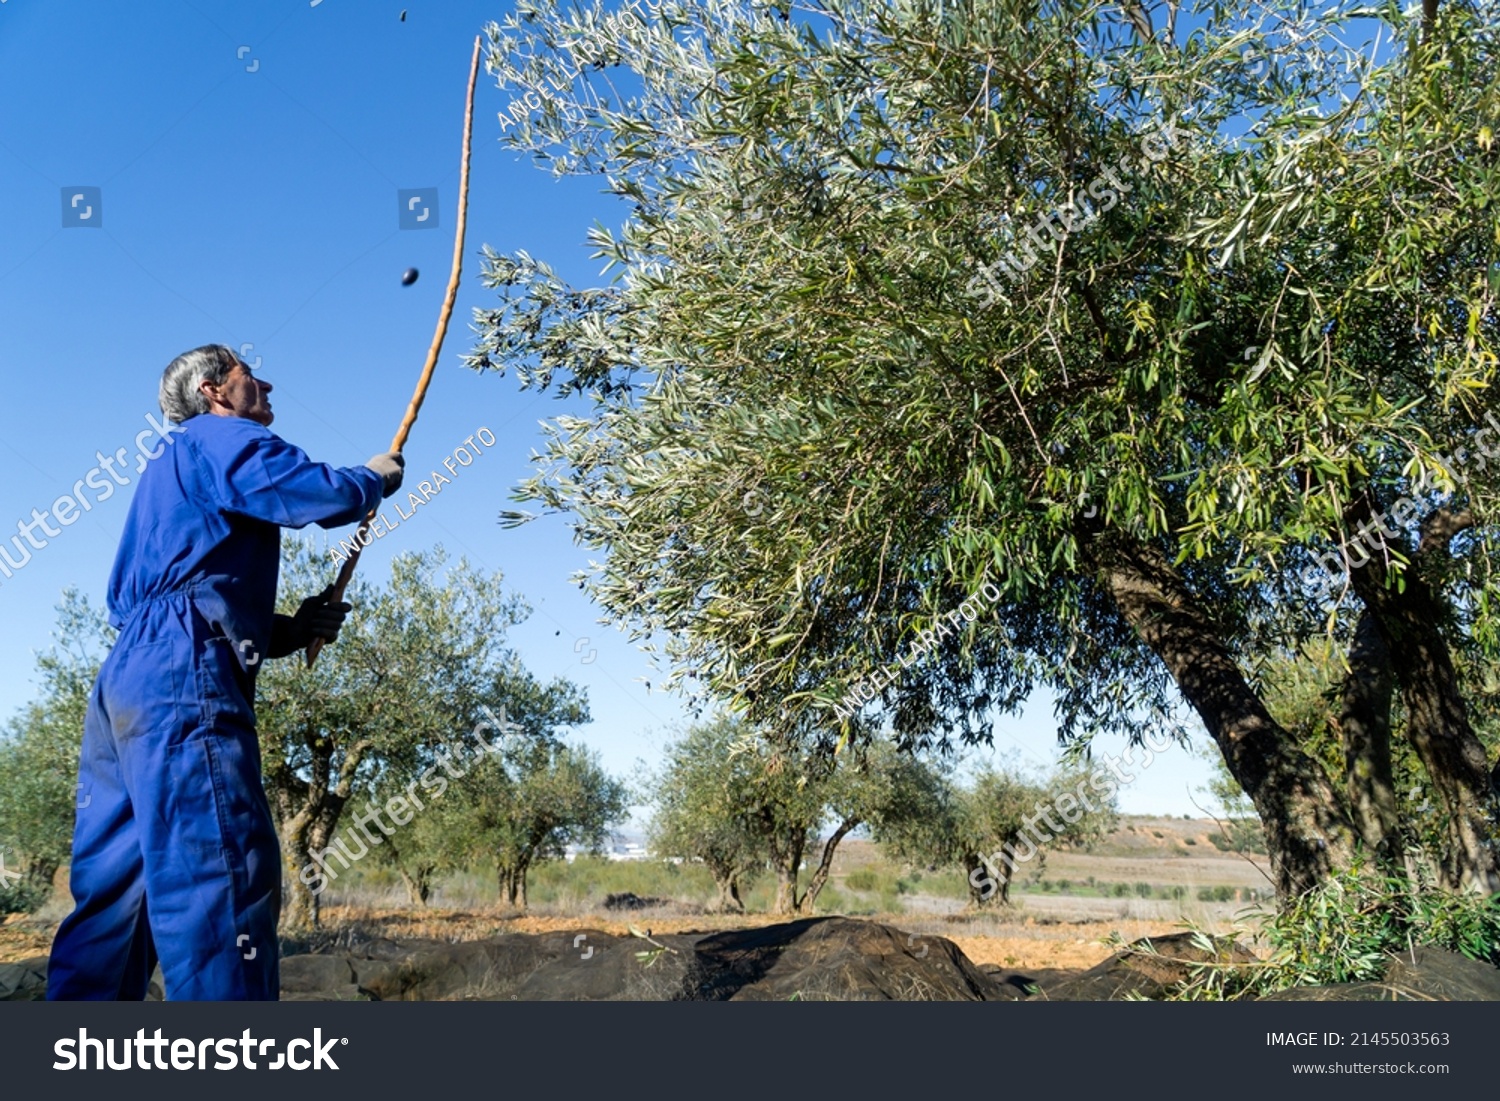 Older man dressed in blue harvesting olives in the traditional way with a stick with plenty of copy space on the right - concept of labor and agriculture. #2145503563